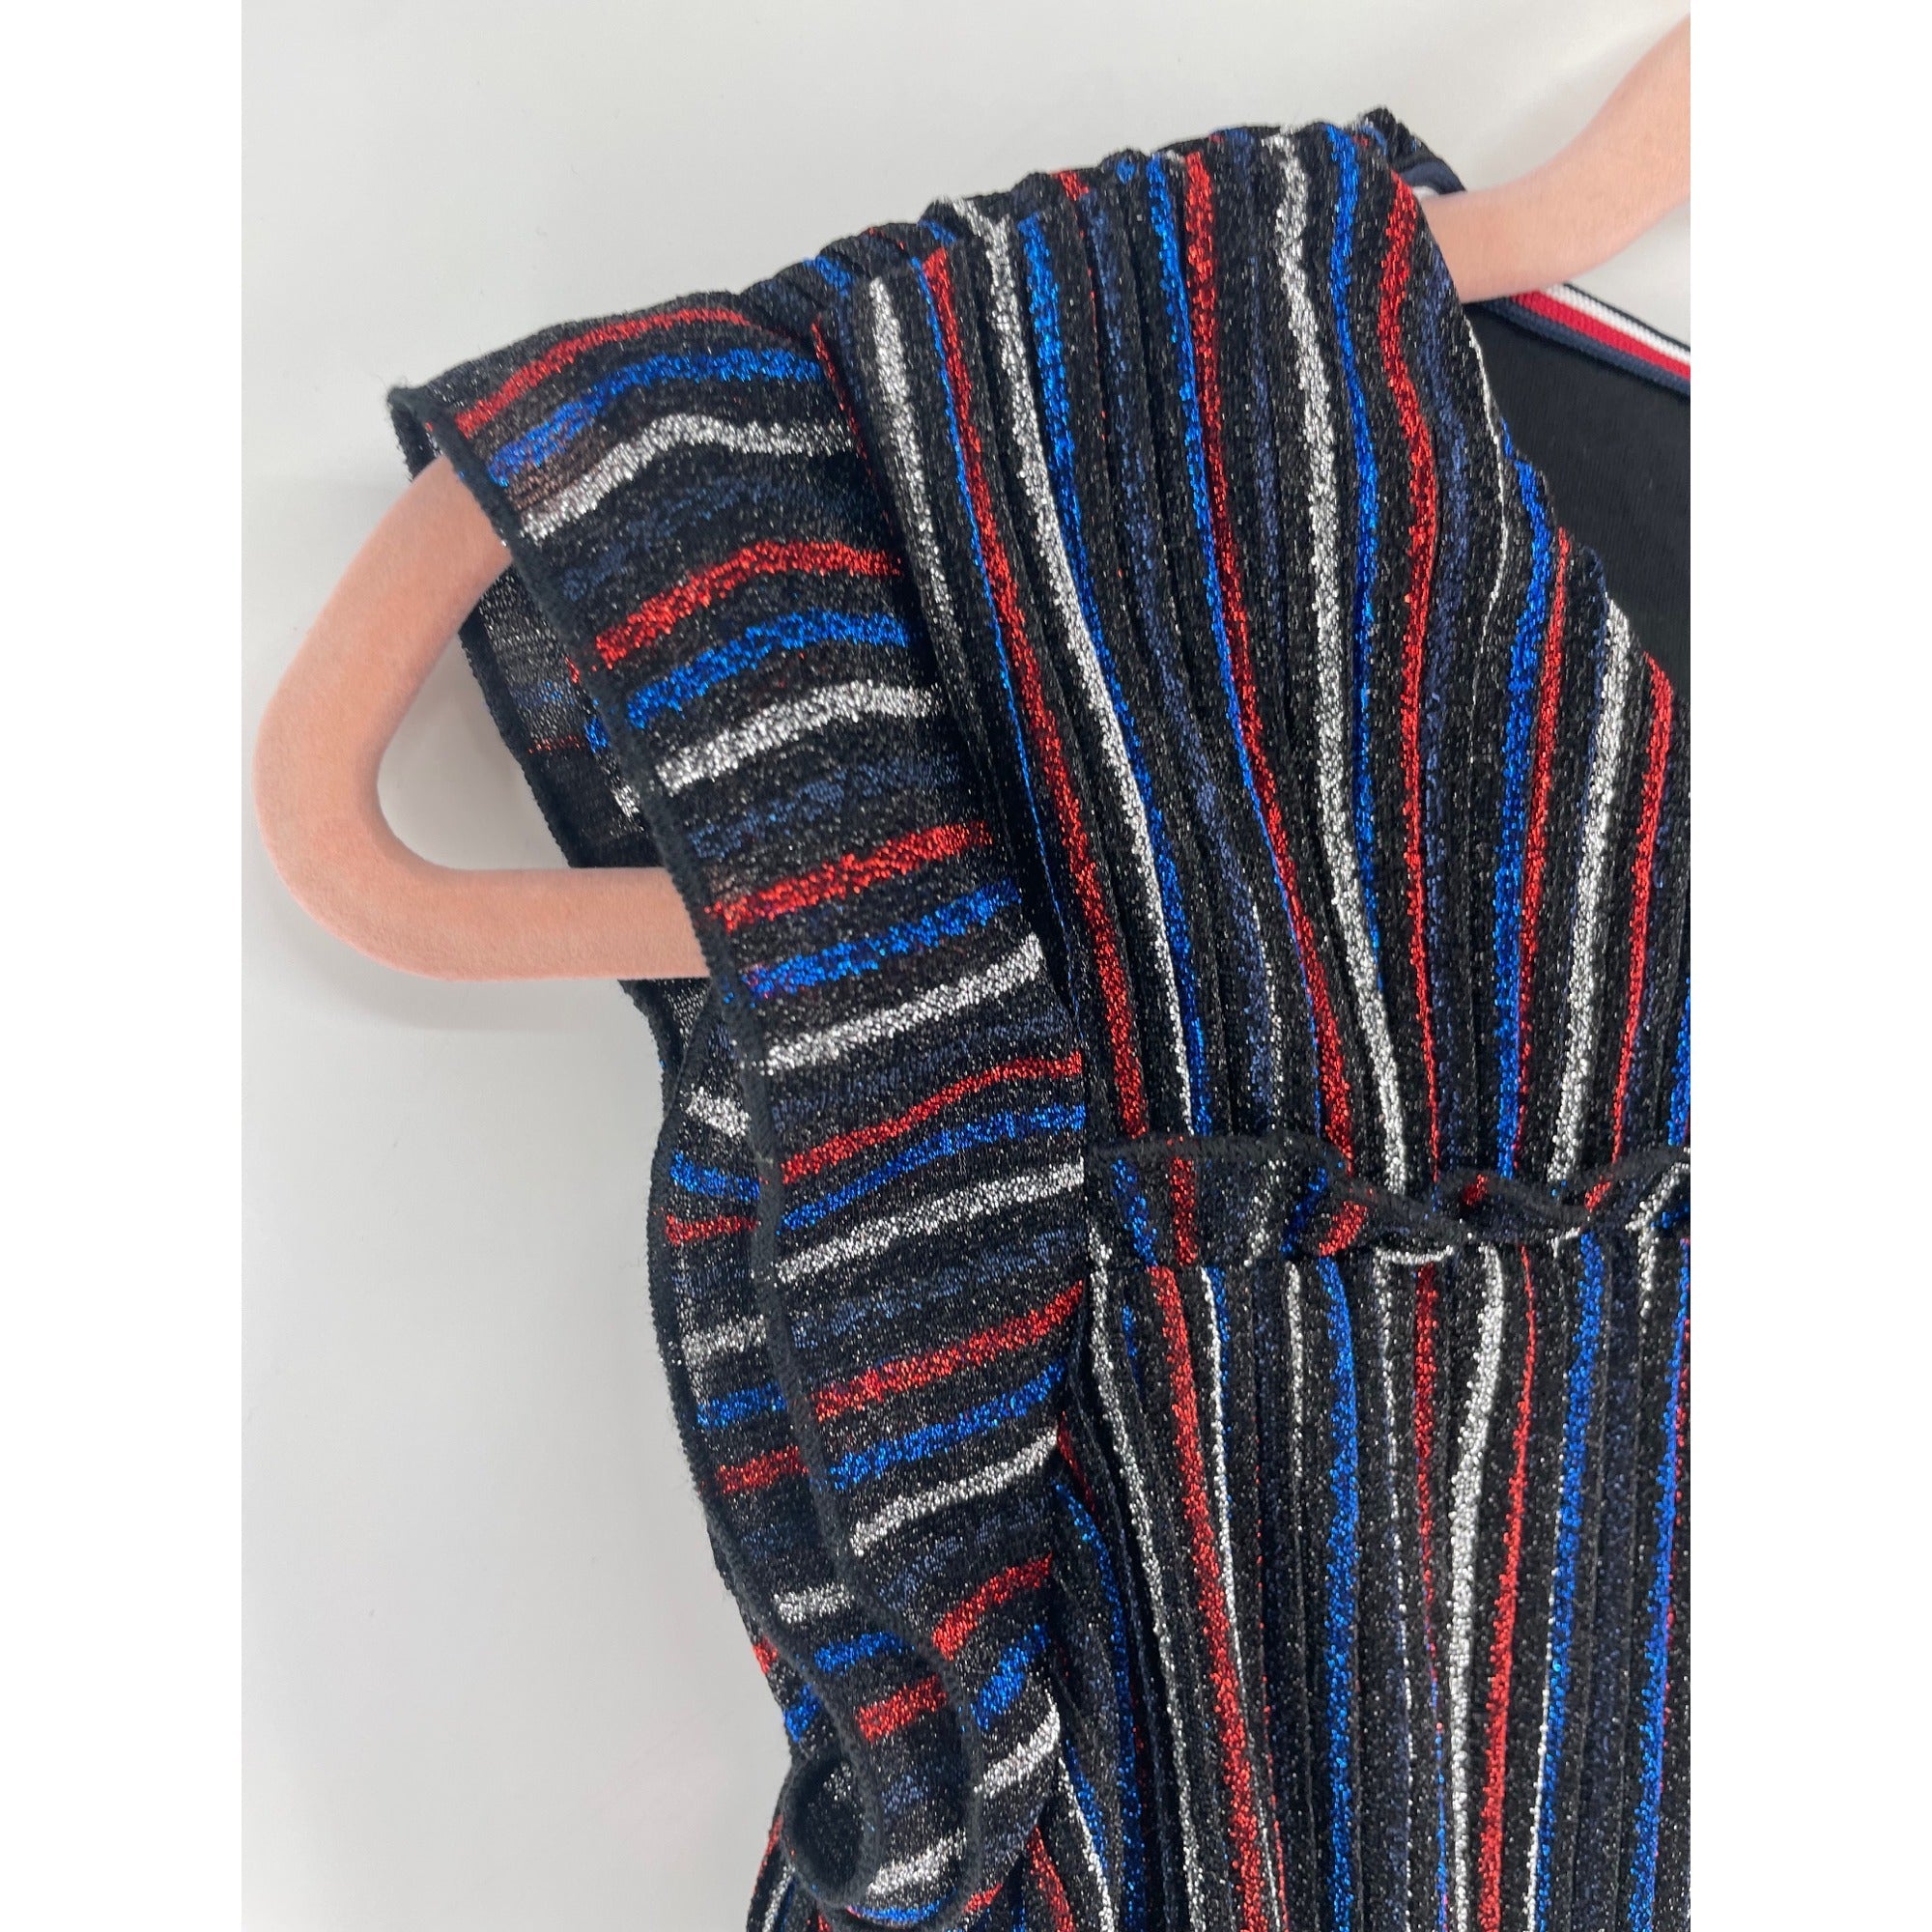 Tommy Hilfiger Girl's Size XL (16) Black/Red/Blue/Silver Sparkly Striped Dress